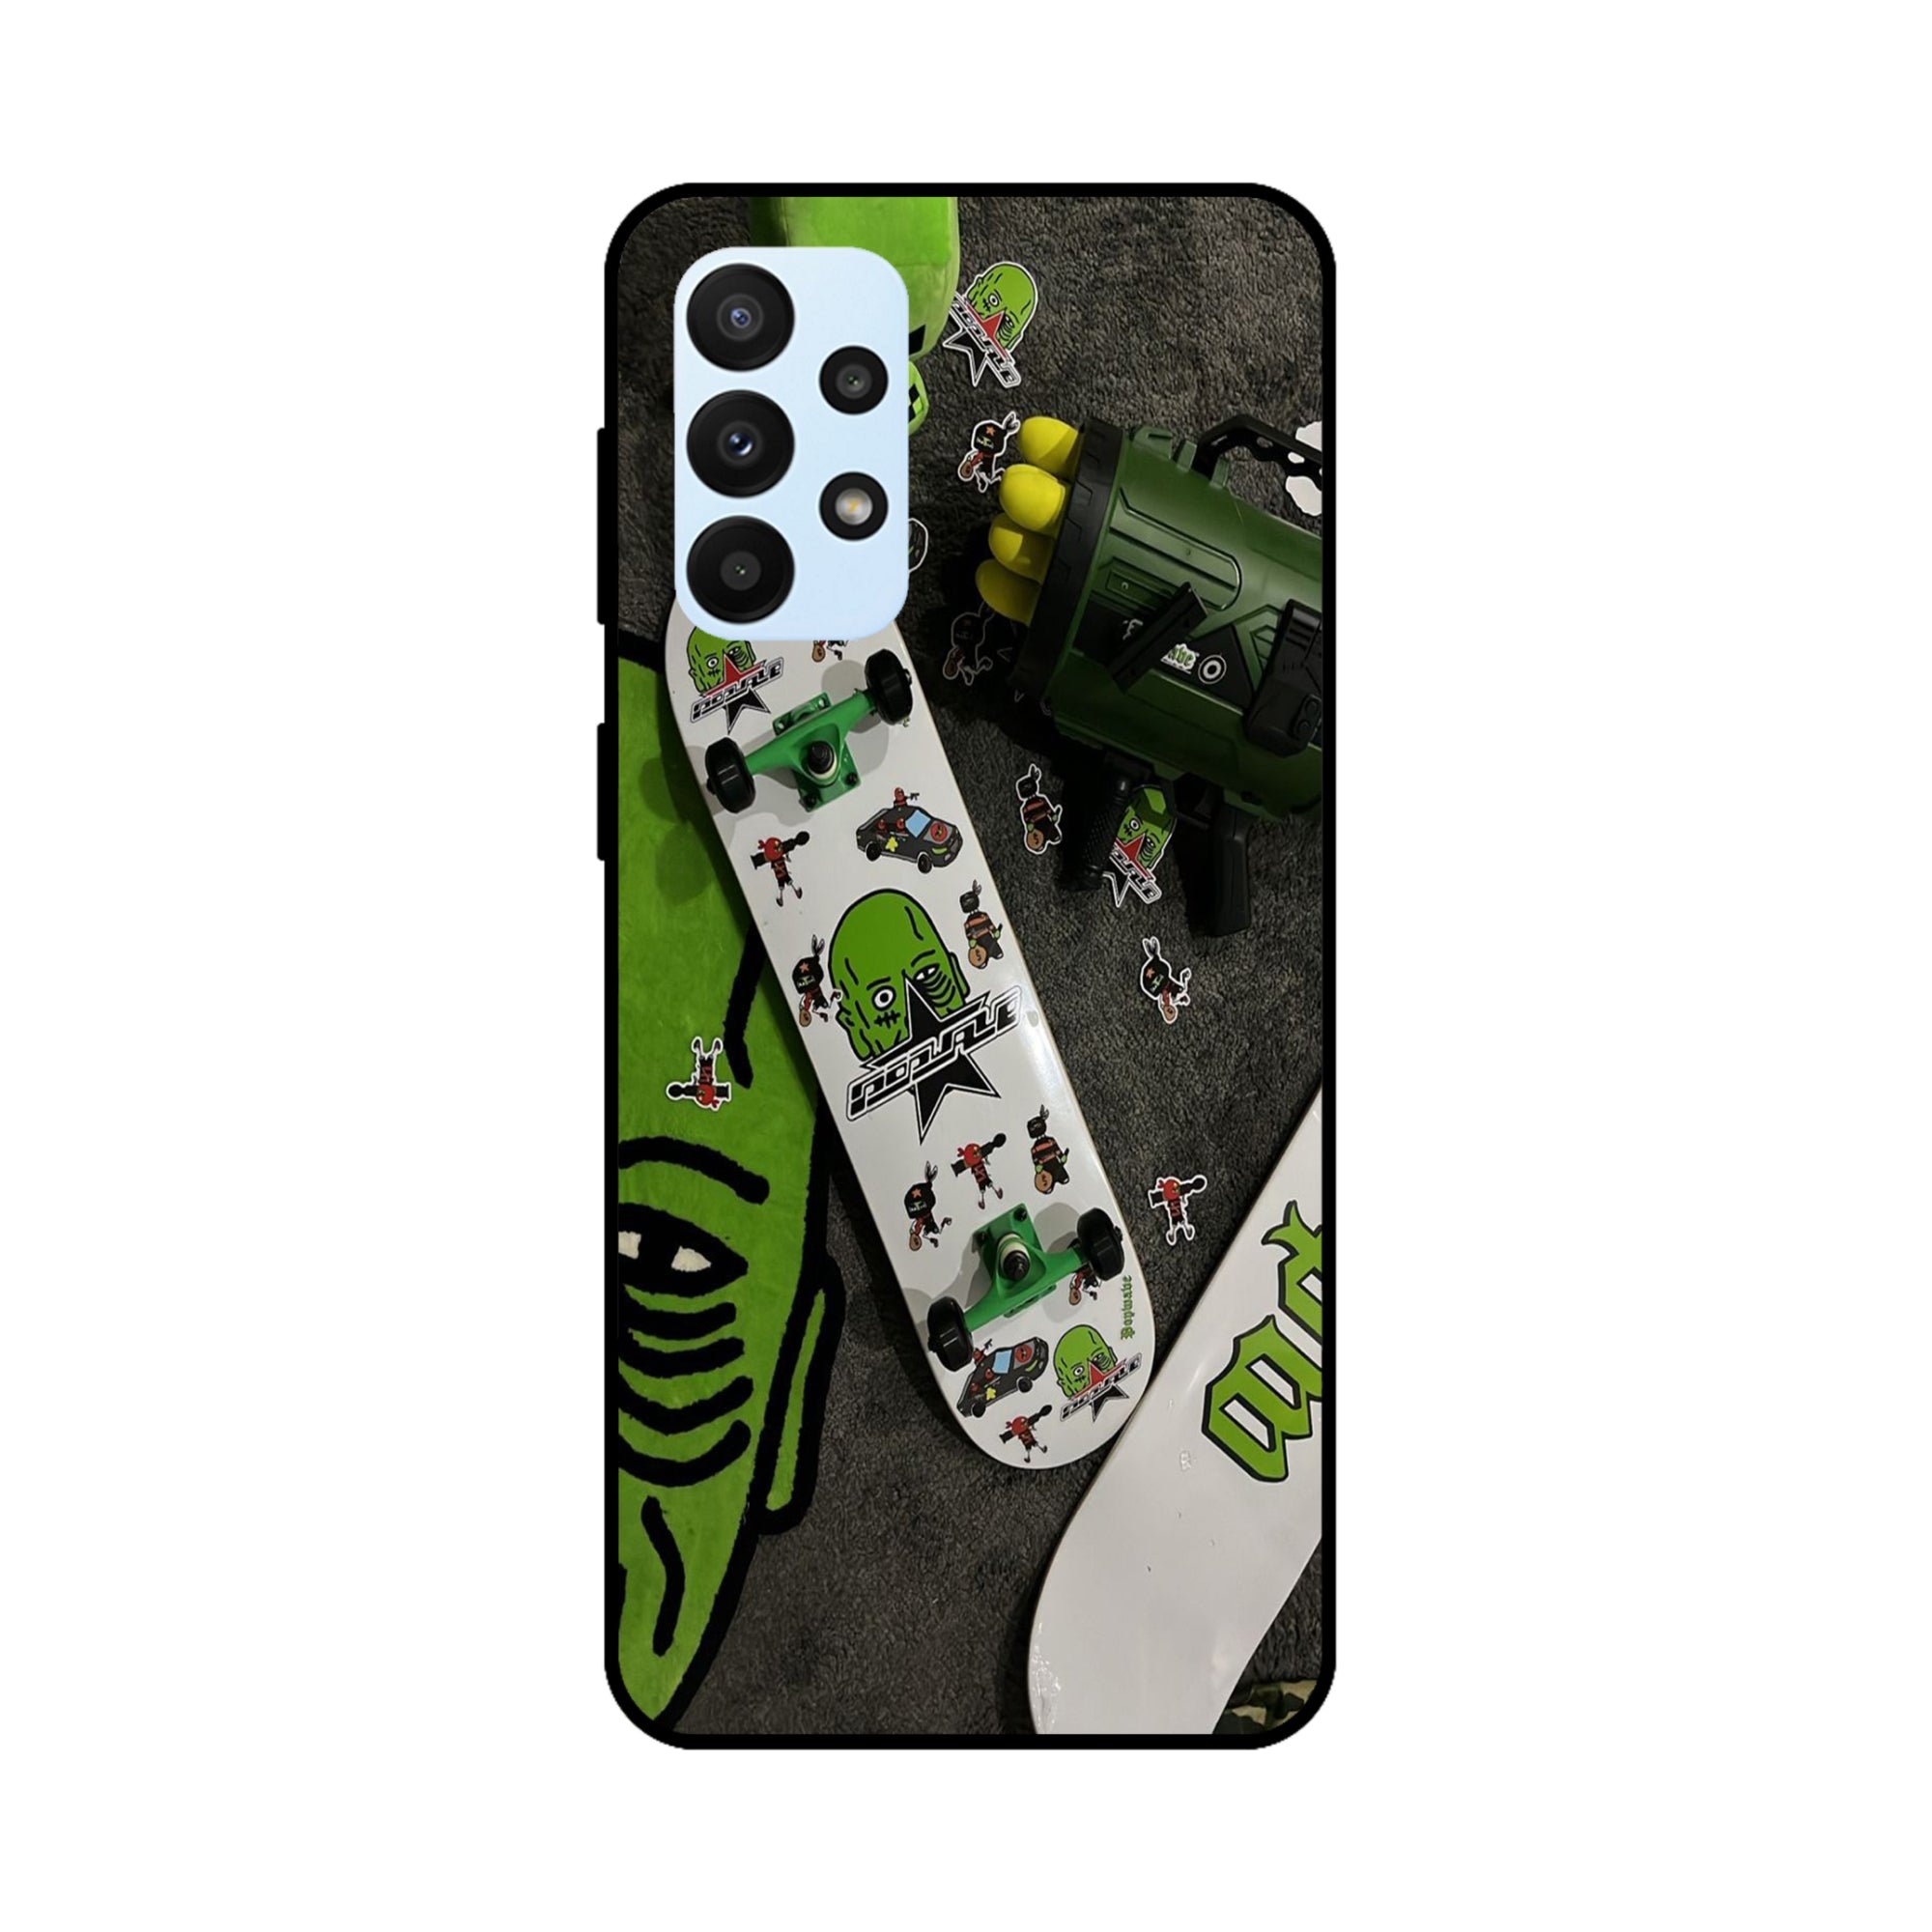 Buy Hulk Skateboard Metal-Silicon Back Mobile Phone Case/Cover For Samsung Galaxy A72 Online